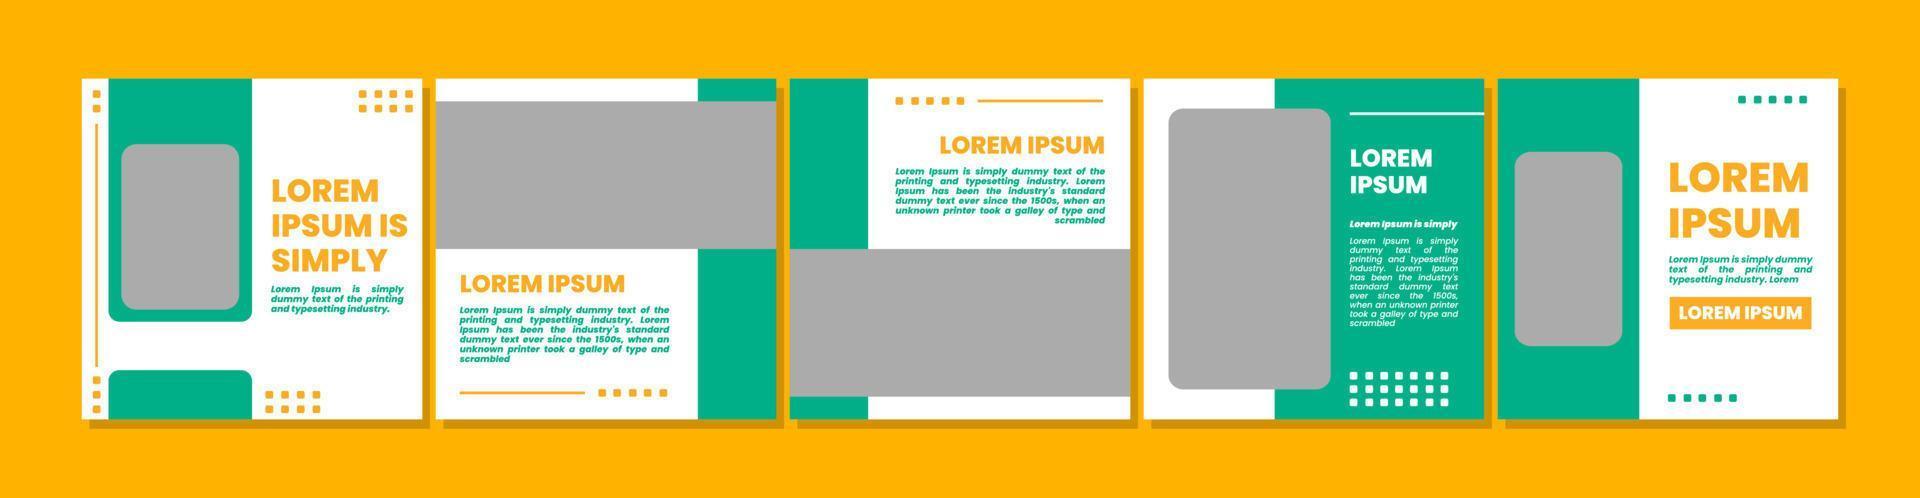 carousel or microblog template for social media posts. social media banner or template with green and orange colors vector